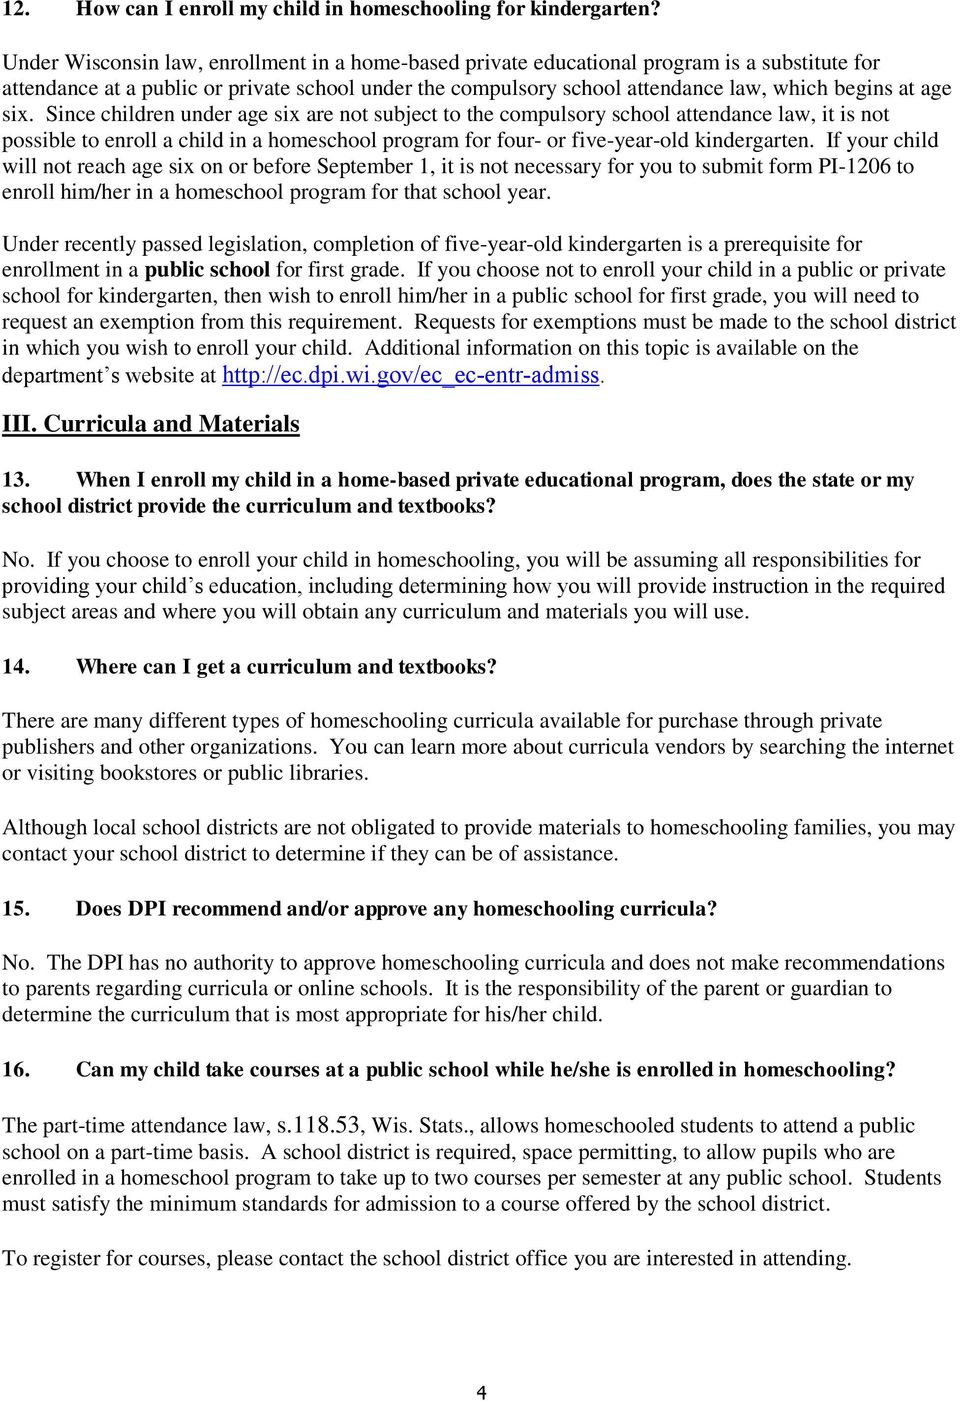 age six. Since children under age six are not subject to the compulsory school attendance law, it is not possible to enroll a child in a homeschool program for four- or five-year-old kindergarten.